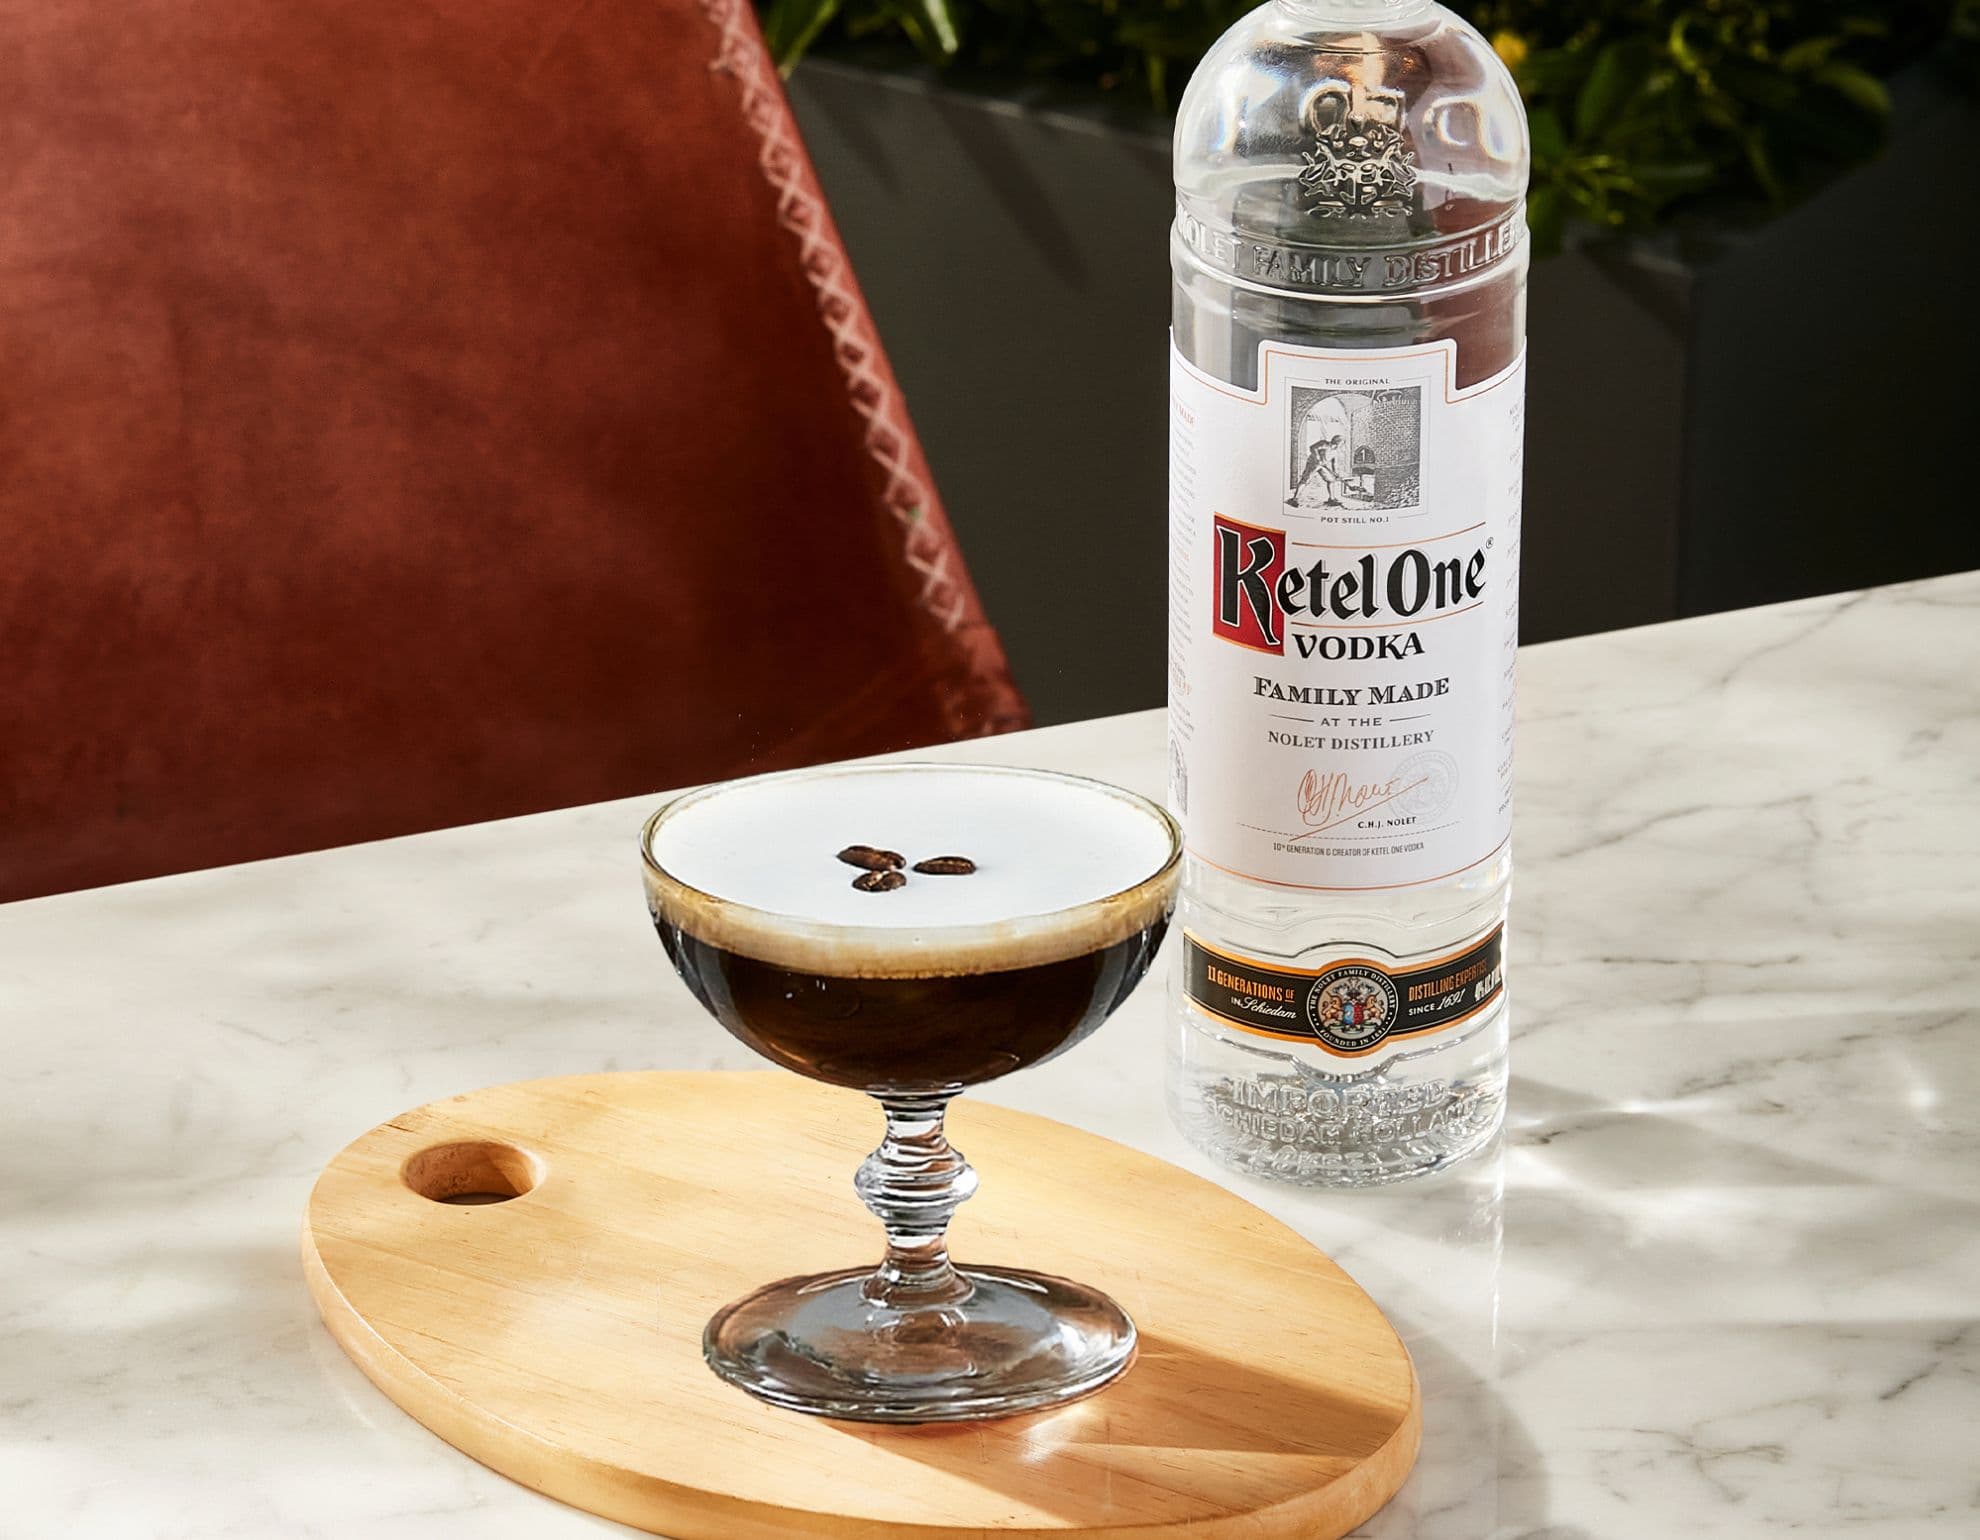 An espresso martini and a French martini next to a bottle of Ketel One Vodka.